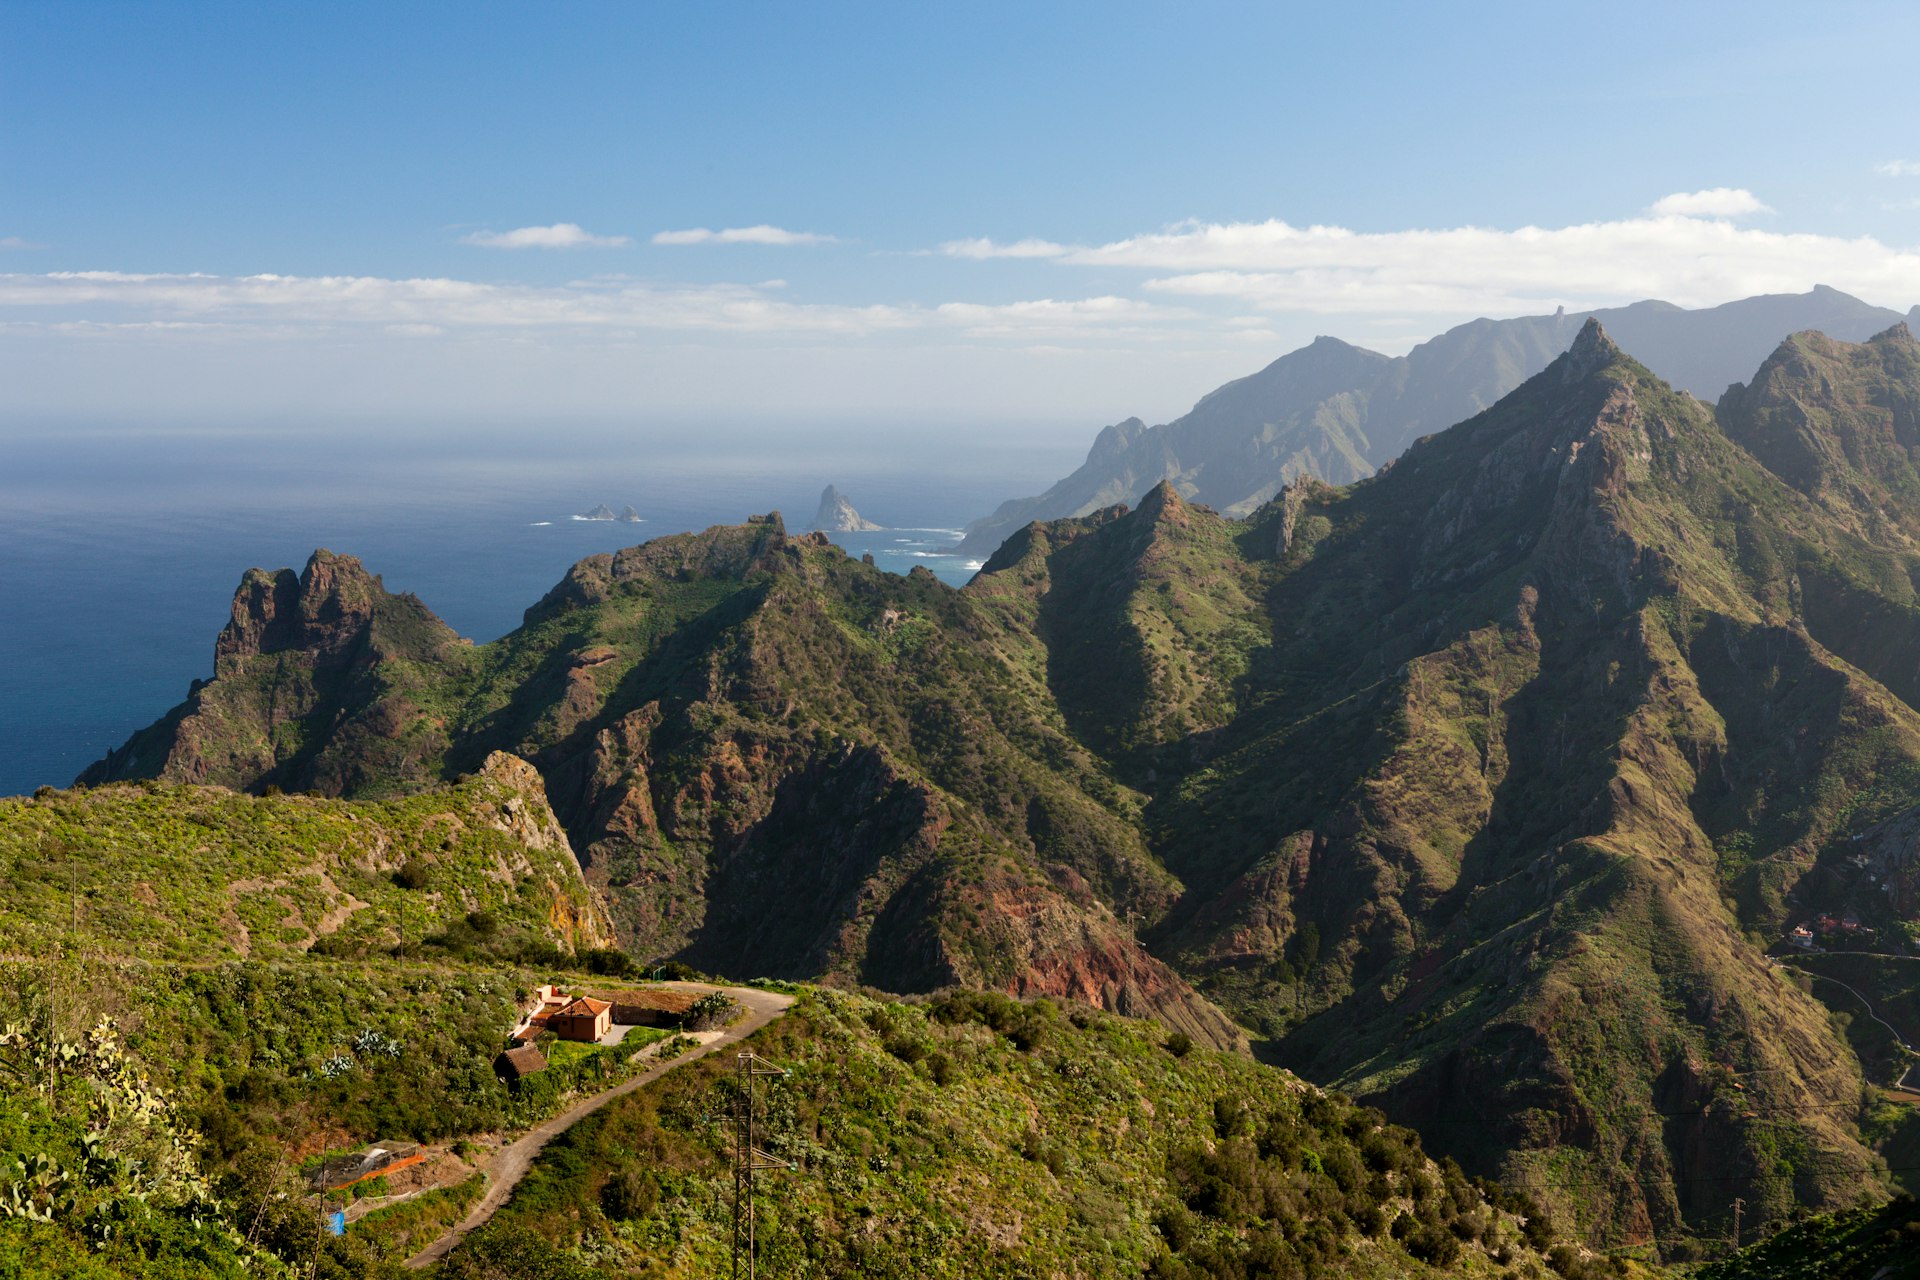 The Anaga Peninsula, in the northeast of the island, is an area known for its off-the-beaten-track activities, with plenty of hikes and dramatic views. © Reinhard Dirscherl / Getty Images